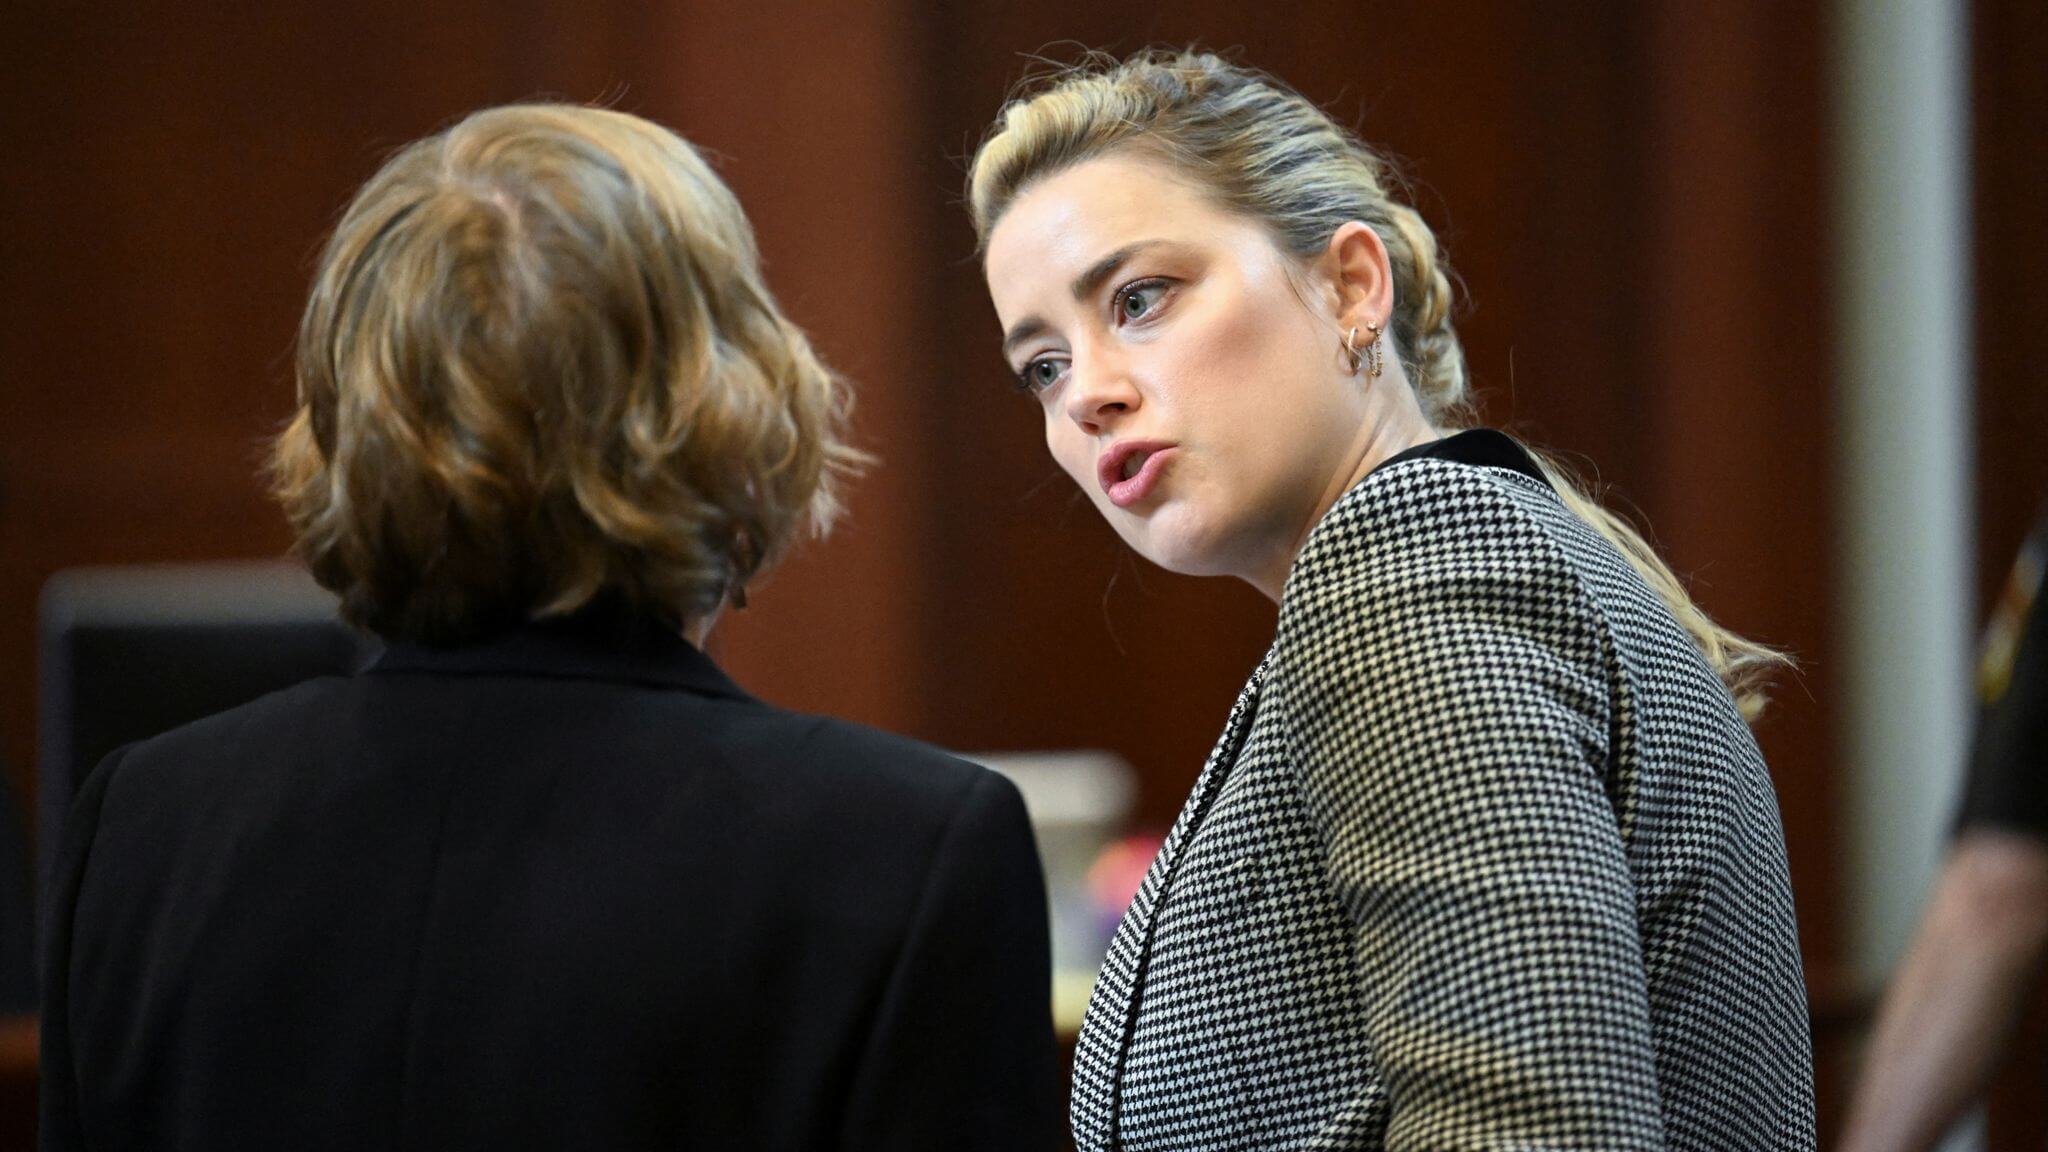 Amber Heard talked about the final judgment